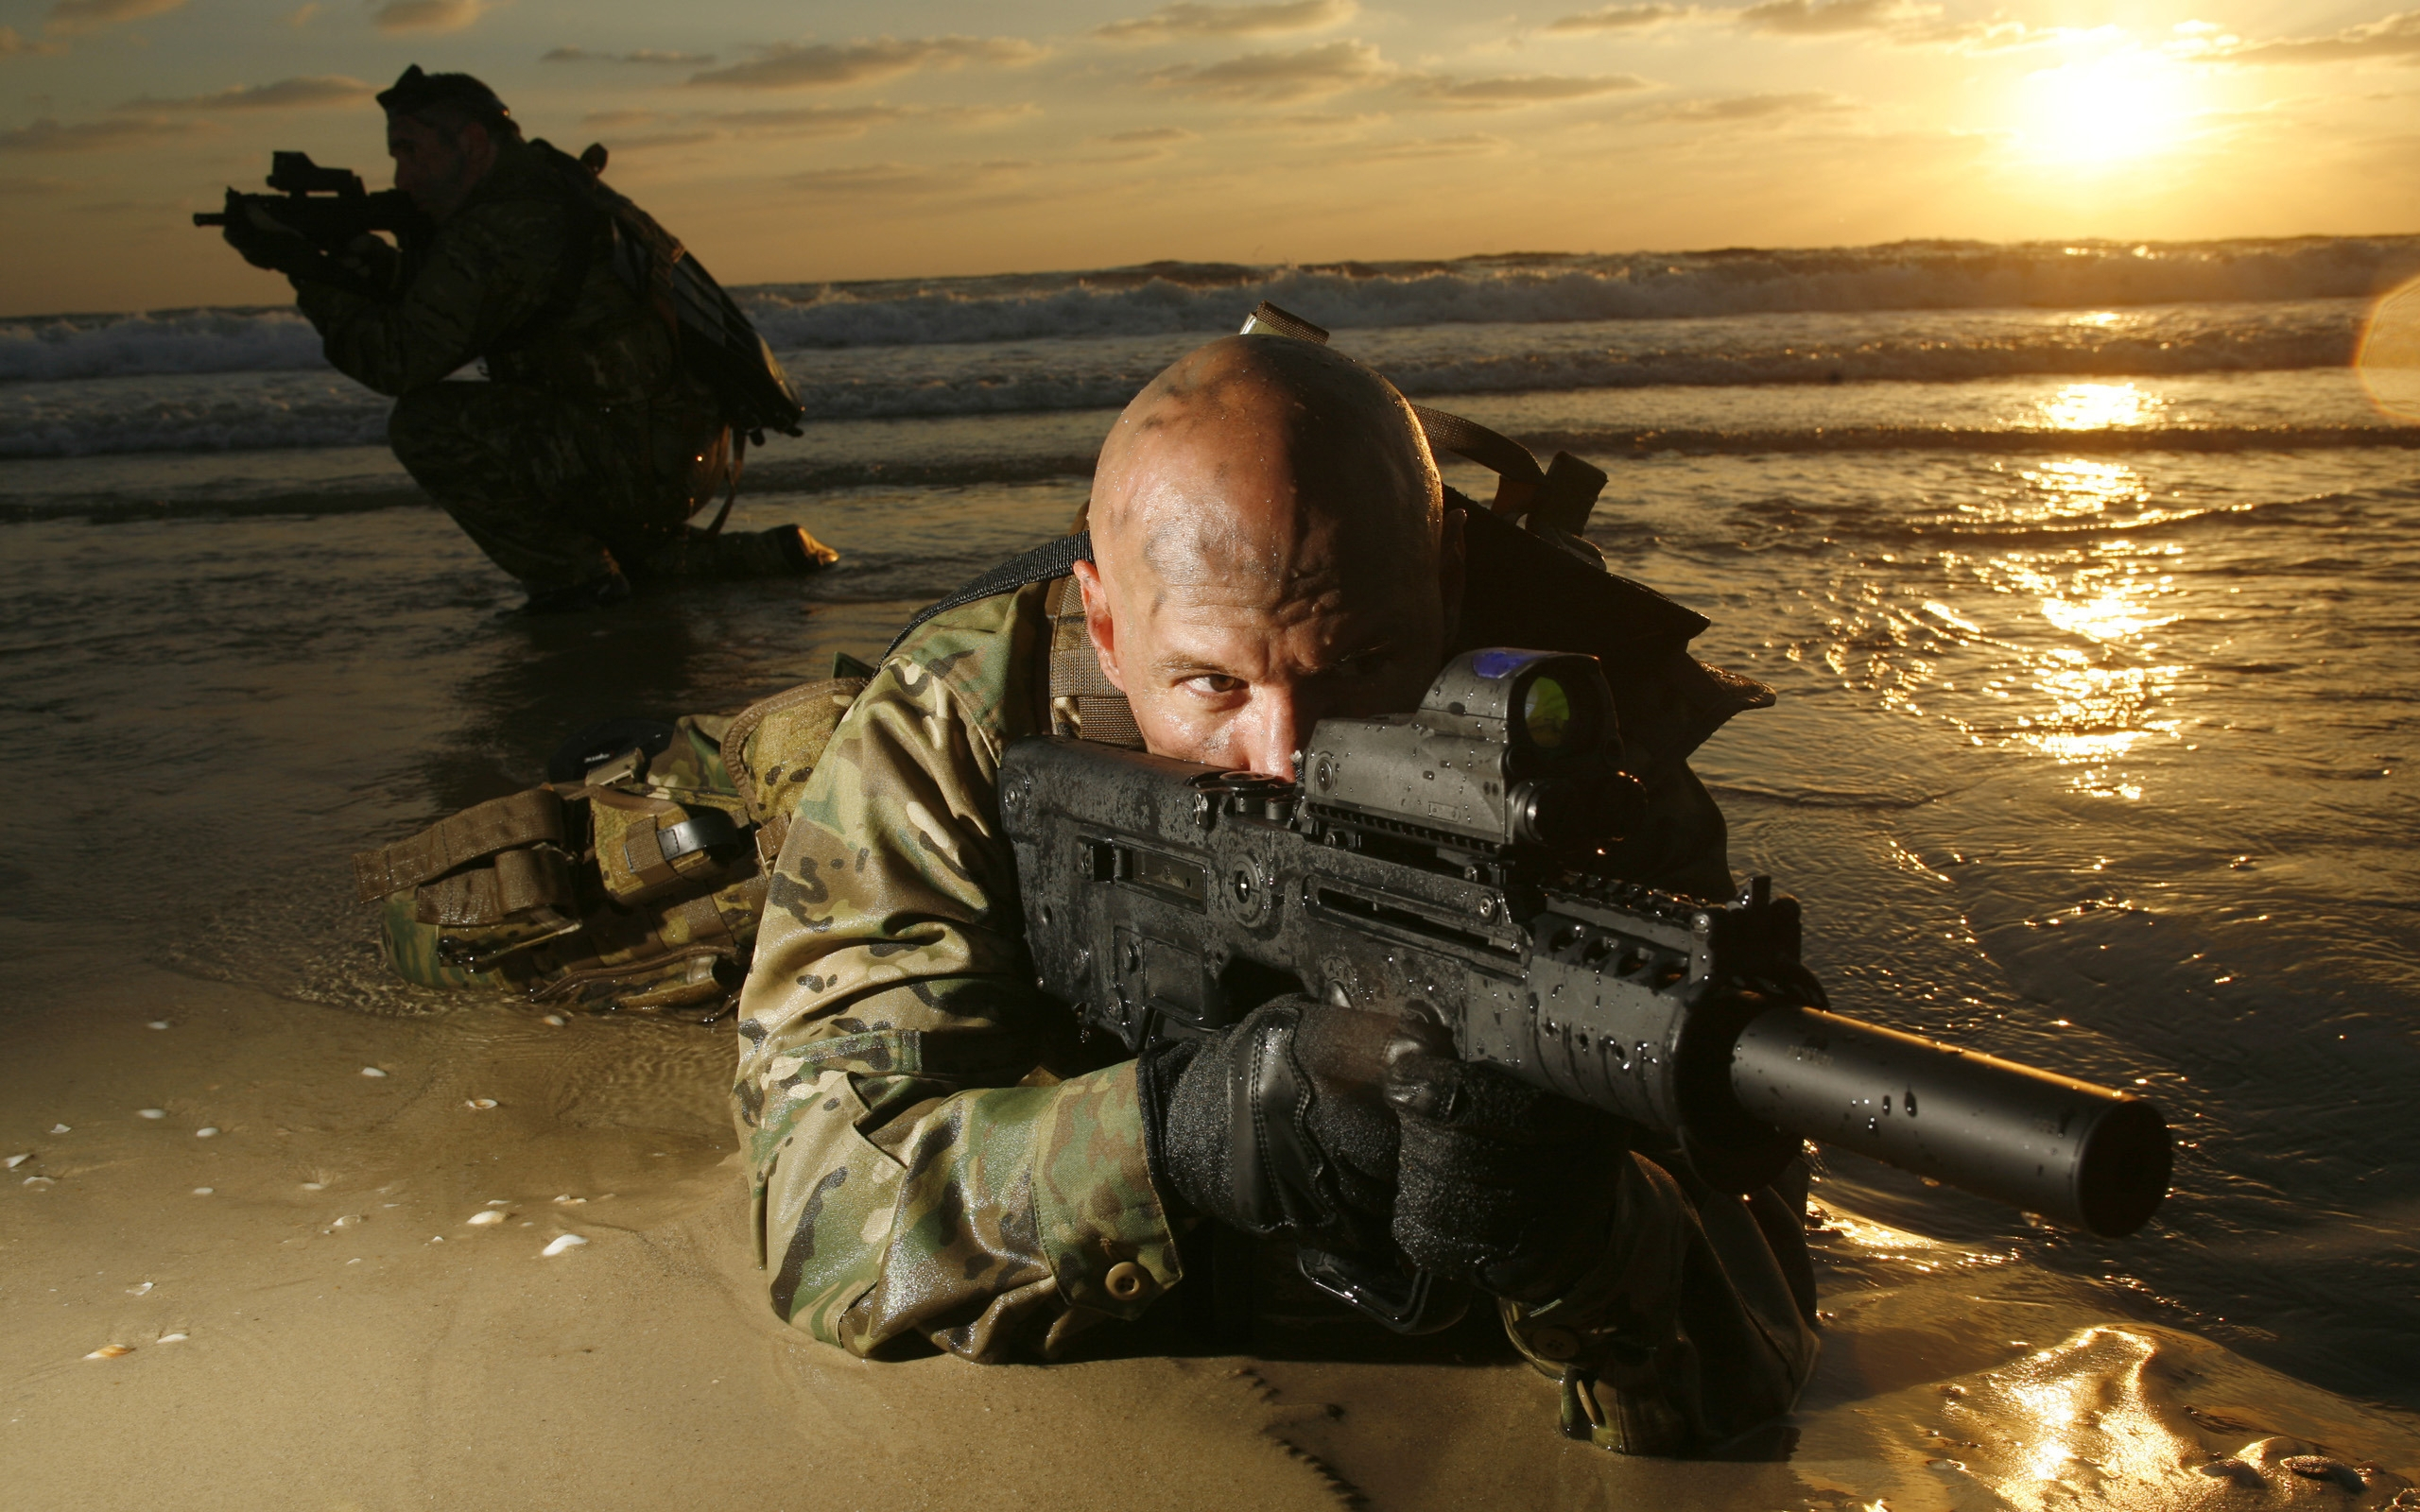 vertical wallpaper military, soldier, army, iwi tavor tar 21